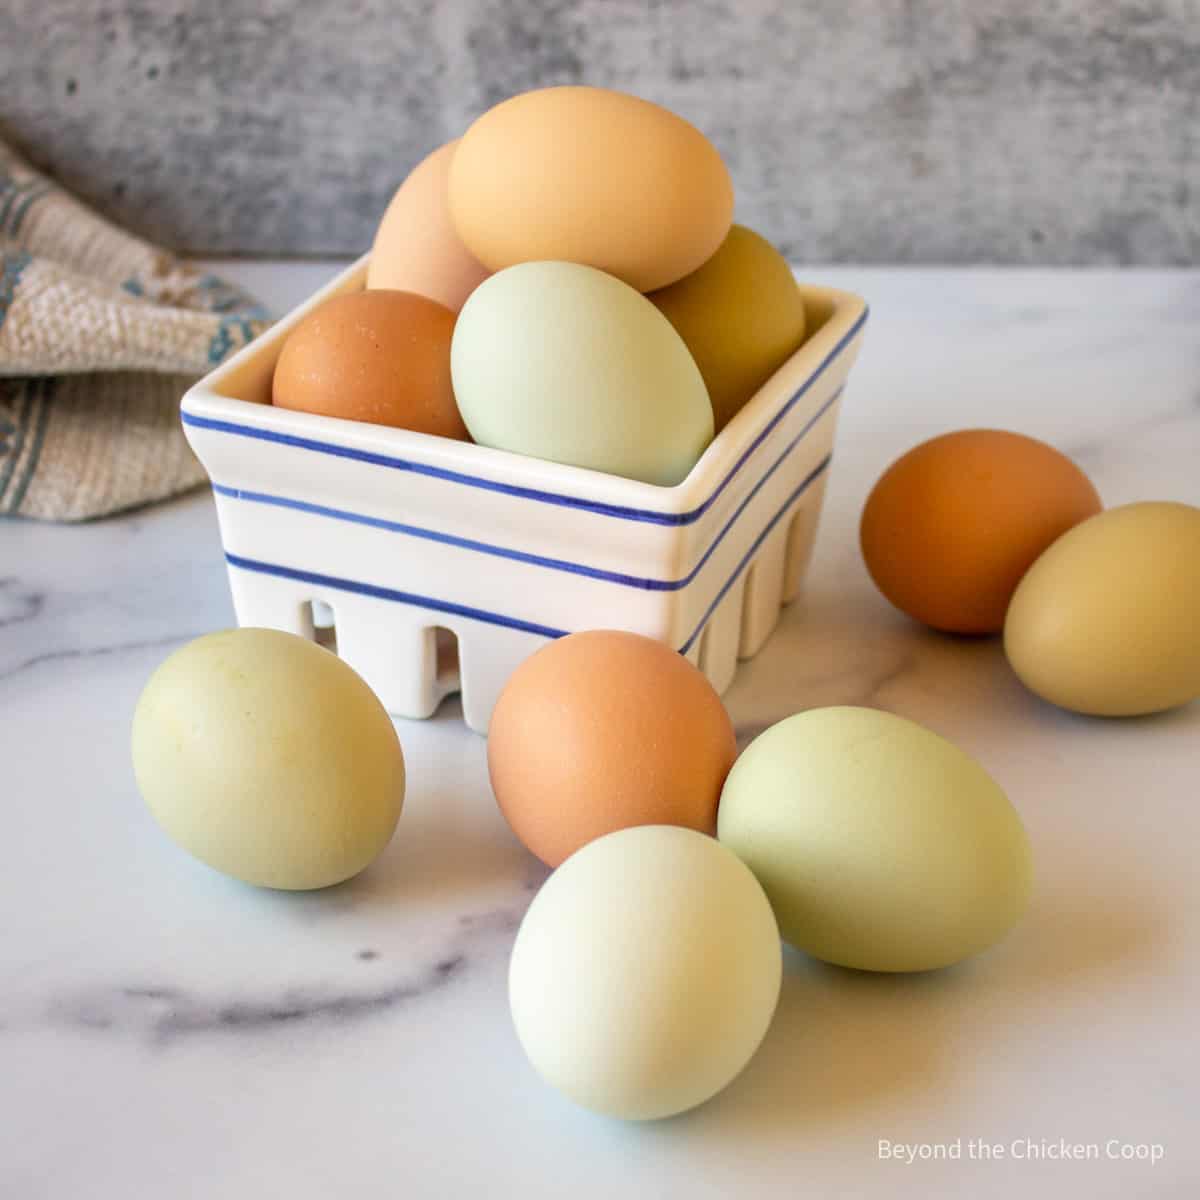 Different colored eggs in a basket.